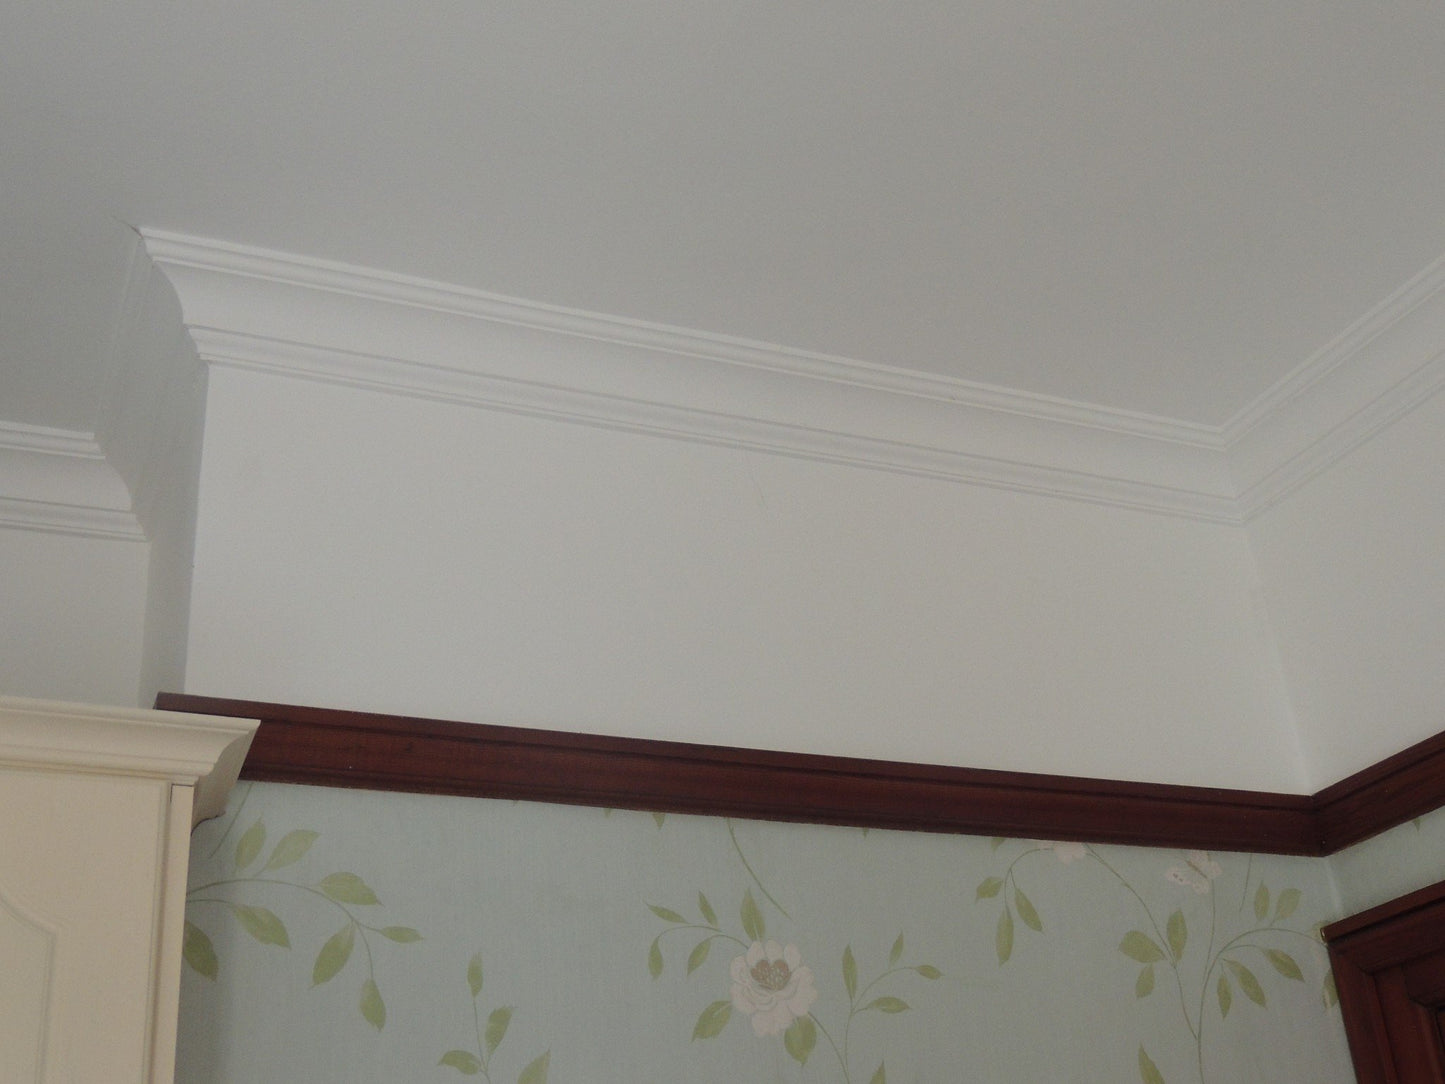 Crown - Classic Coving installed in a room